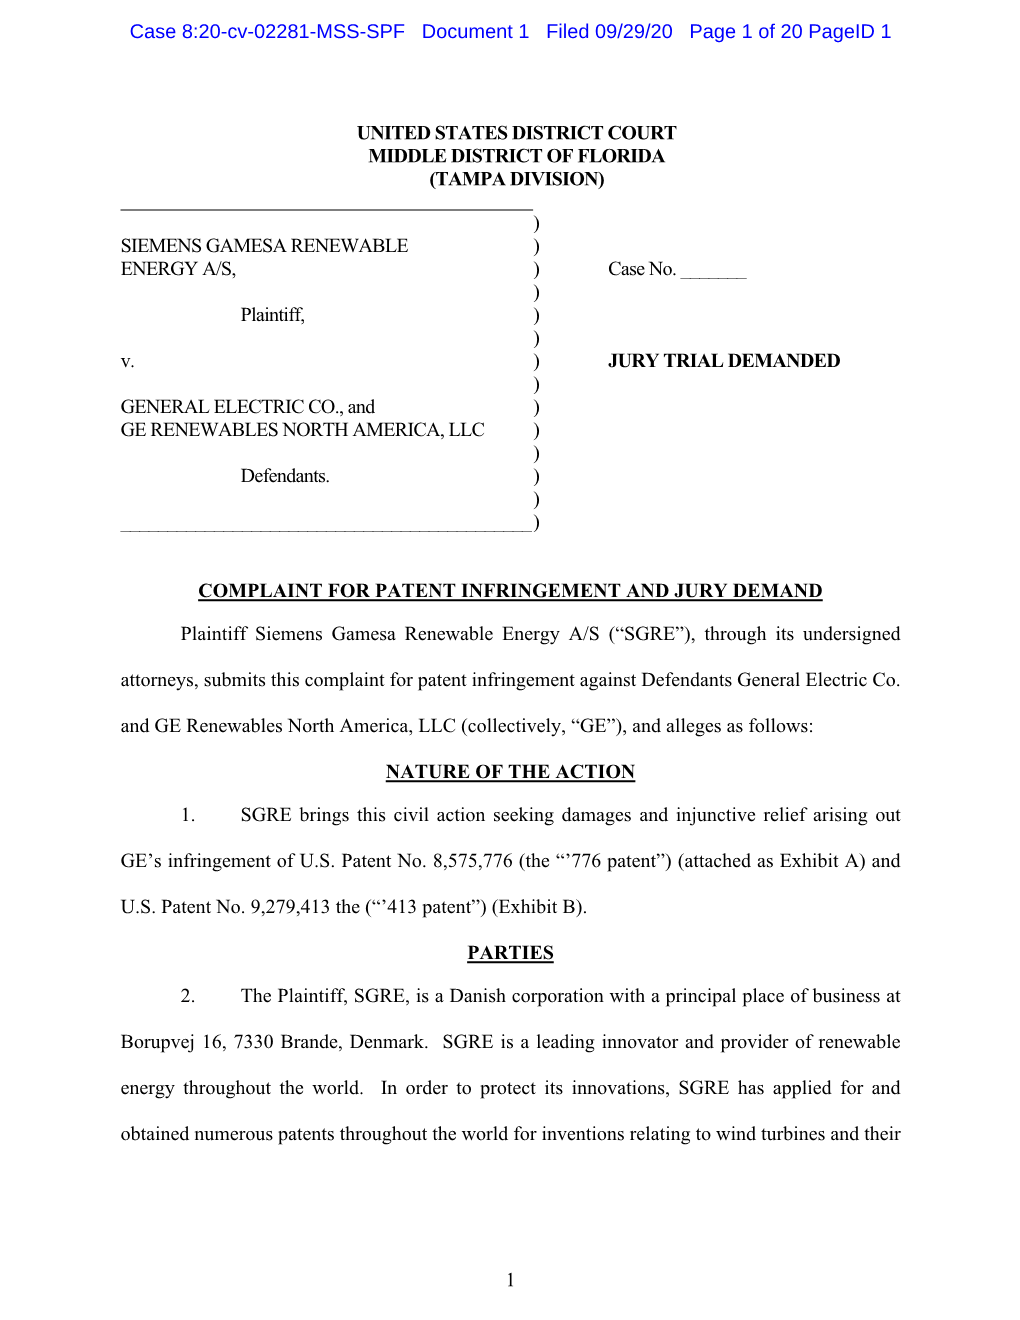 Siemens Gamesa Renewable Energy A/S (“SGRE”), Through Its Undersigned Attorneys, Submits This Complaint for Patent Infringement Against Defendants General Electric Co